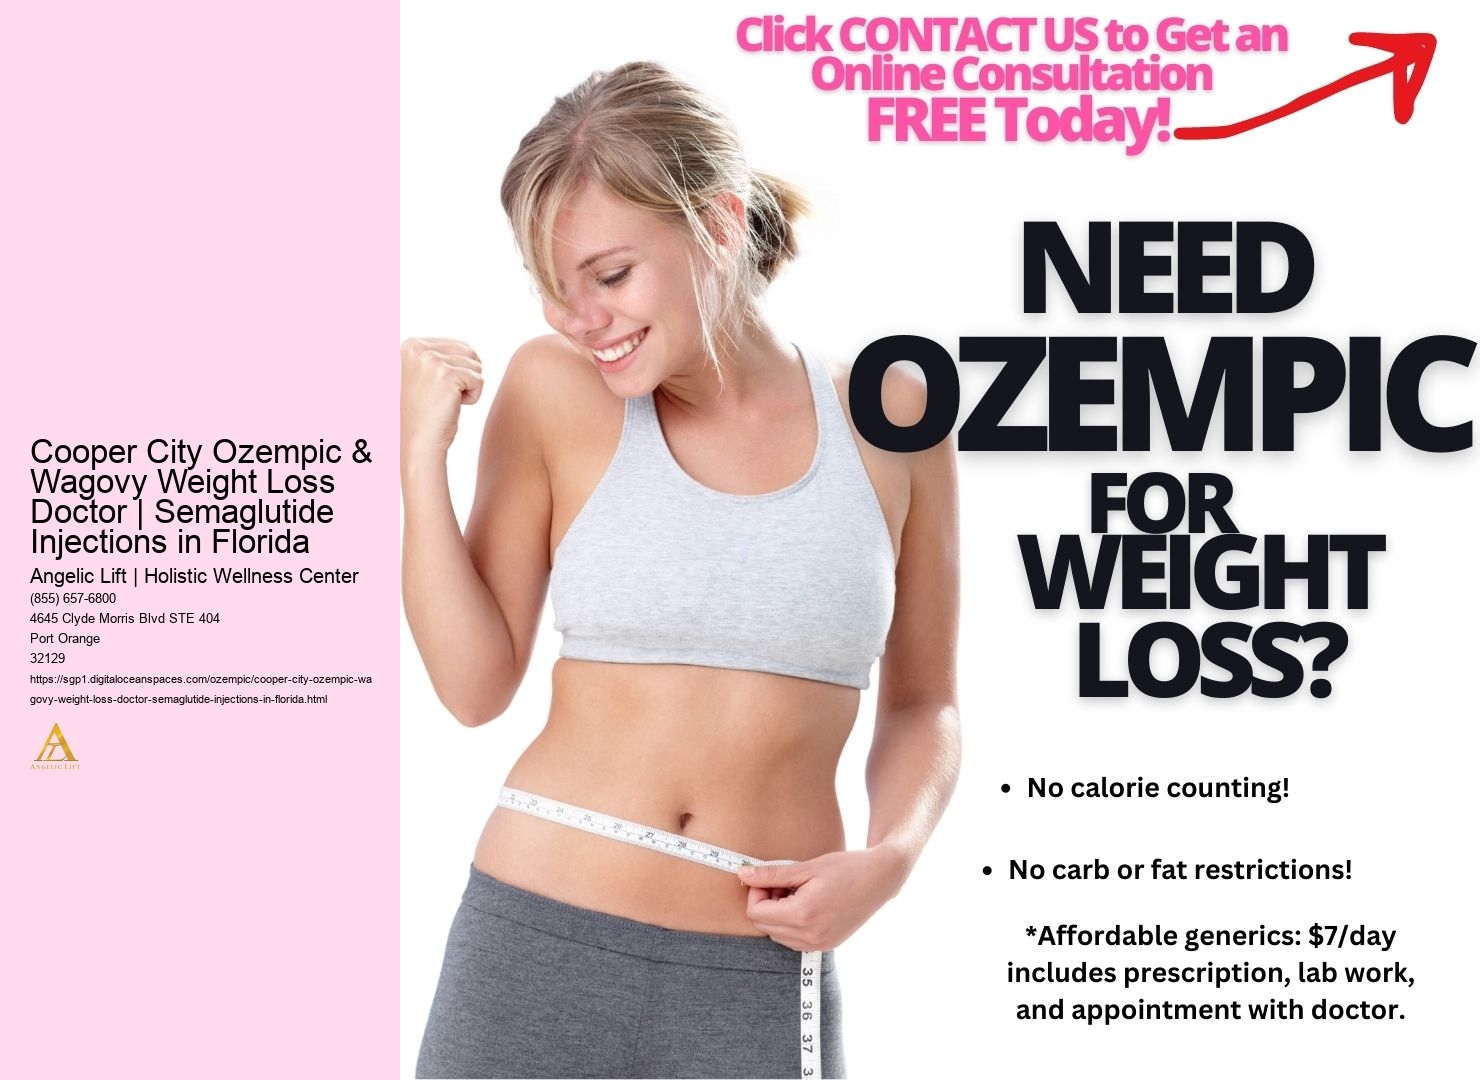 Cooper City Ozempic & Wagovy Weight Loss Doctor | Semaglutide Injections in Florida